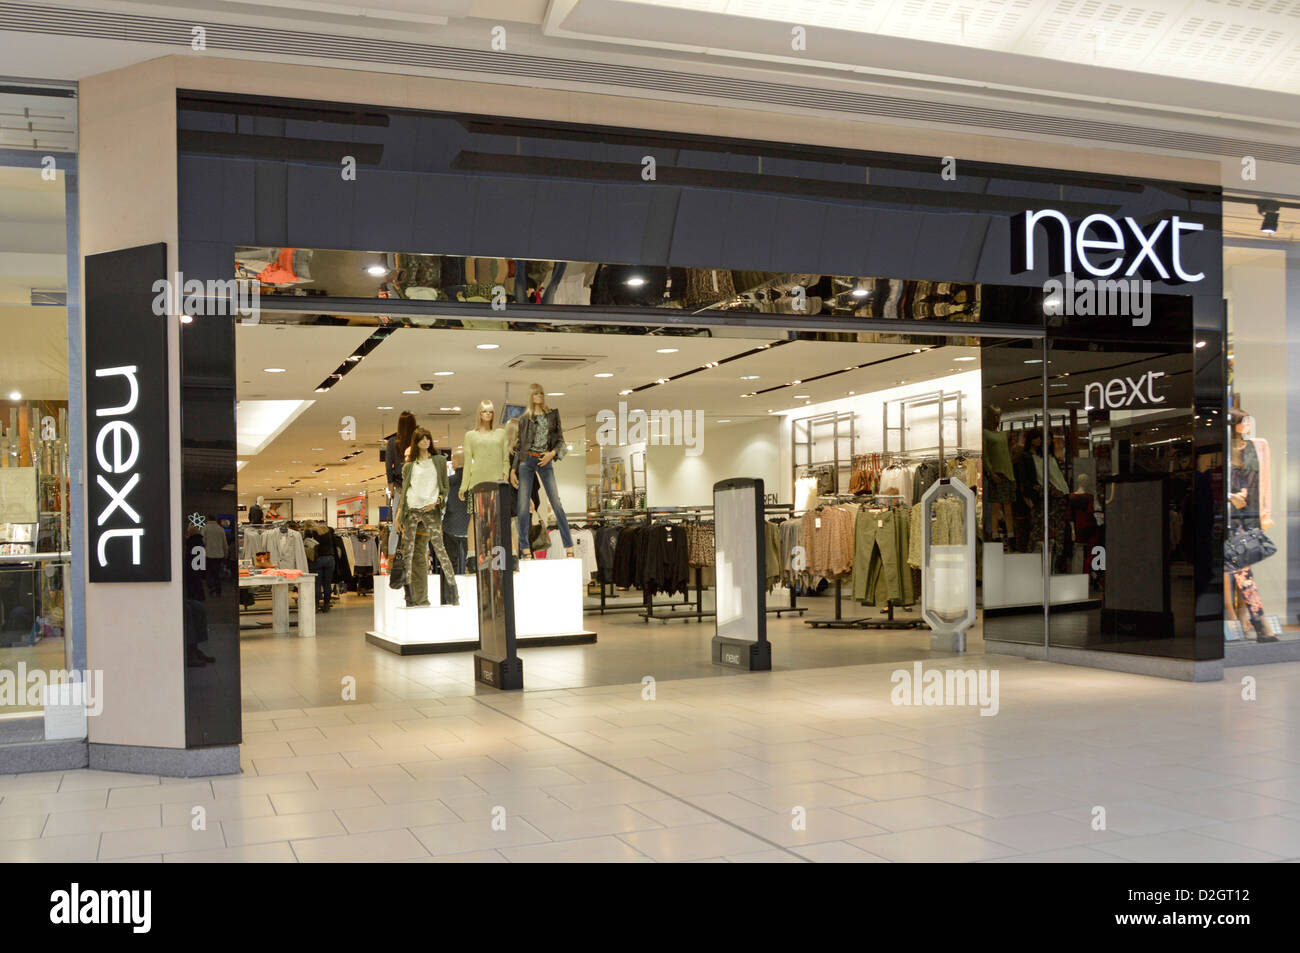 Next Clothing Store Shop Front Window In Shopping Mall Stock Photo